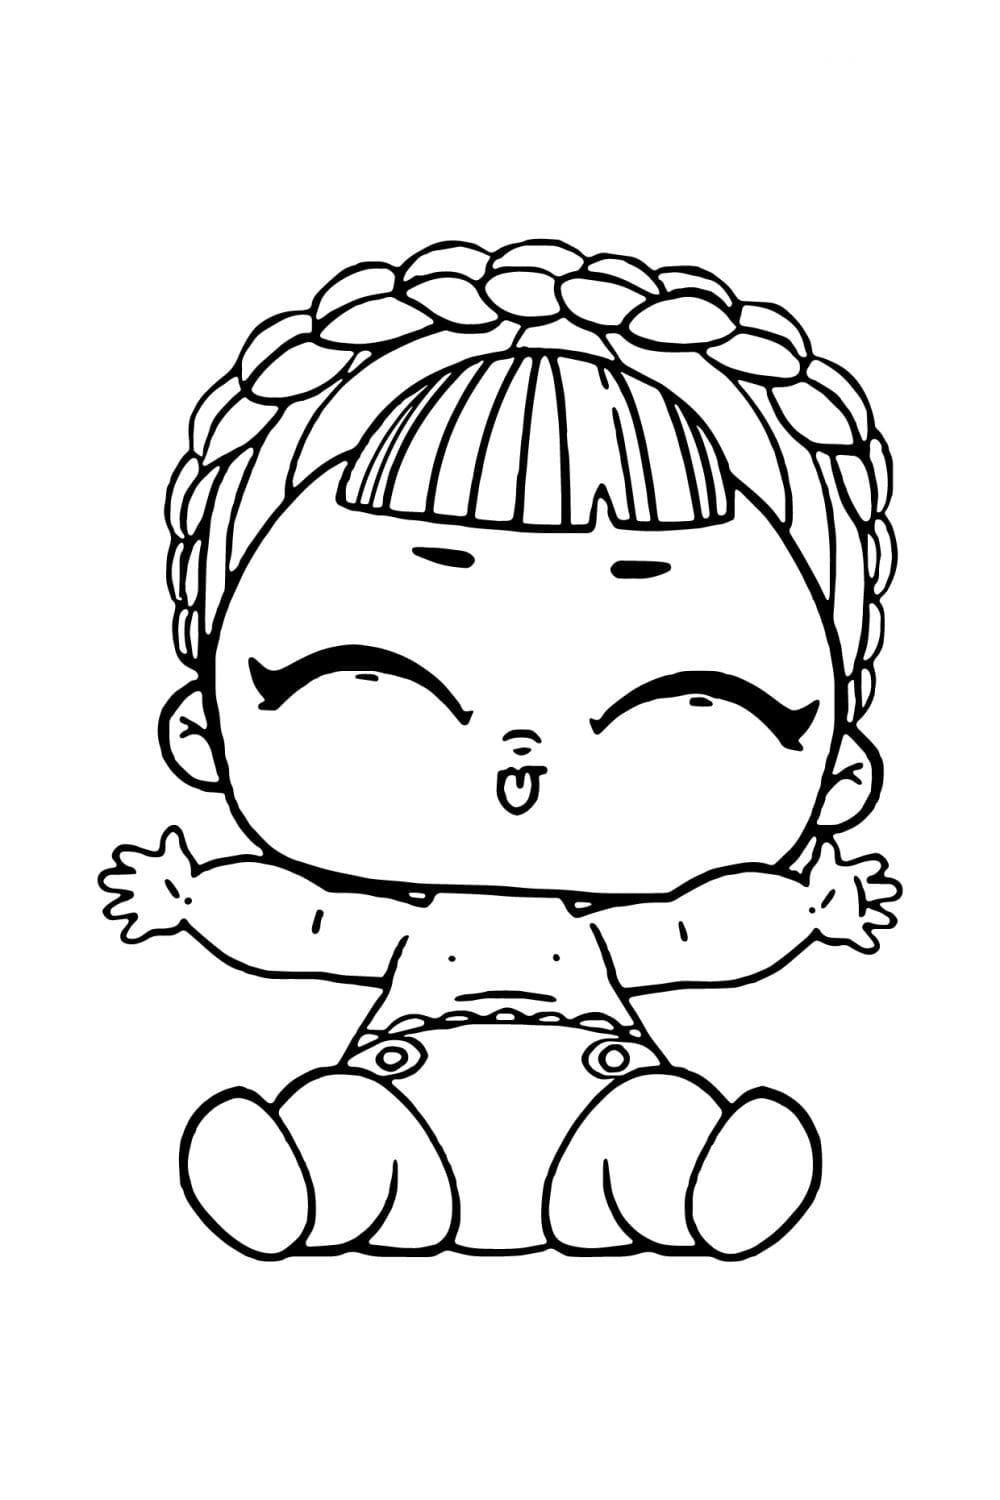 LOL Baby Sonia BB Coloring Page   Free Printable Coloring Pages ...